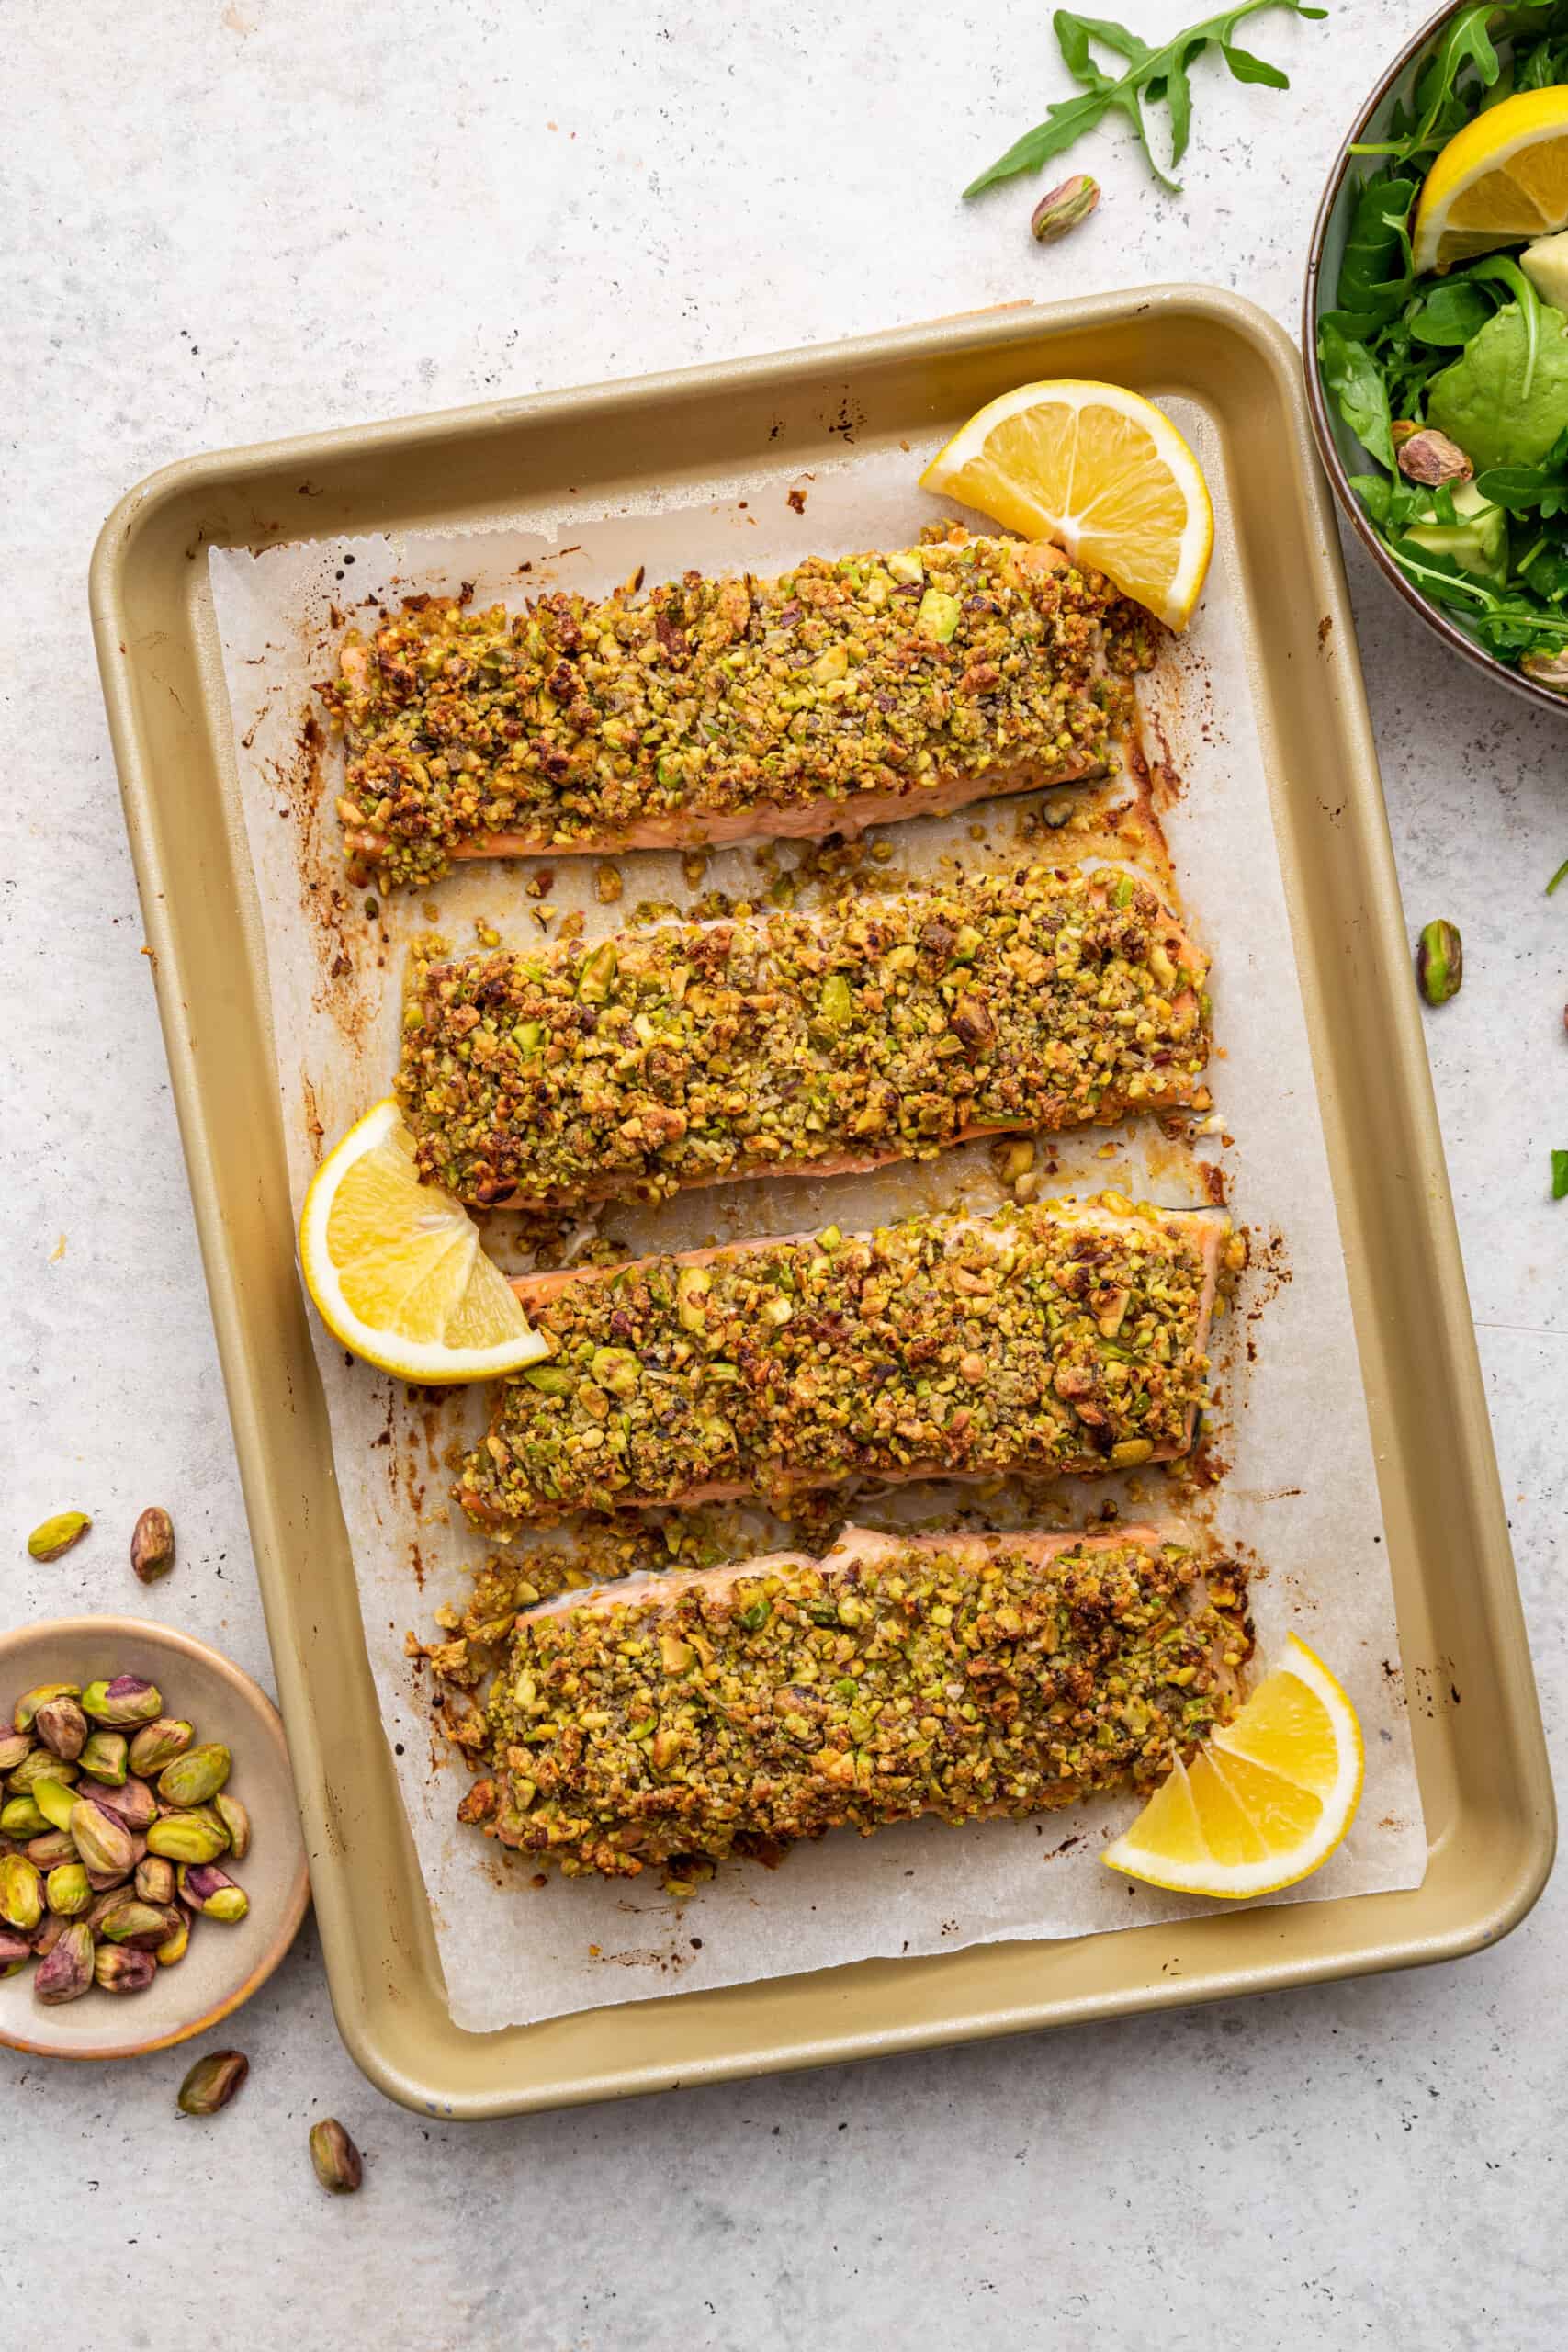 Overhead view of 4 pistachio crusted salmon fillets on sheet pan